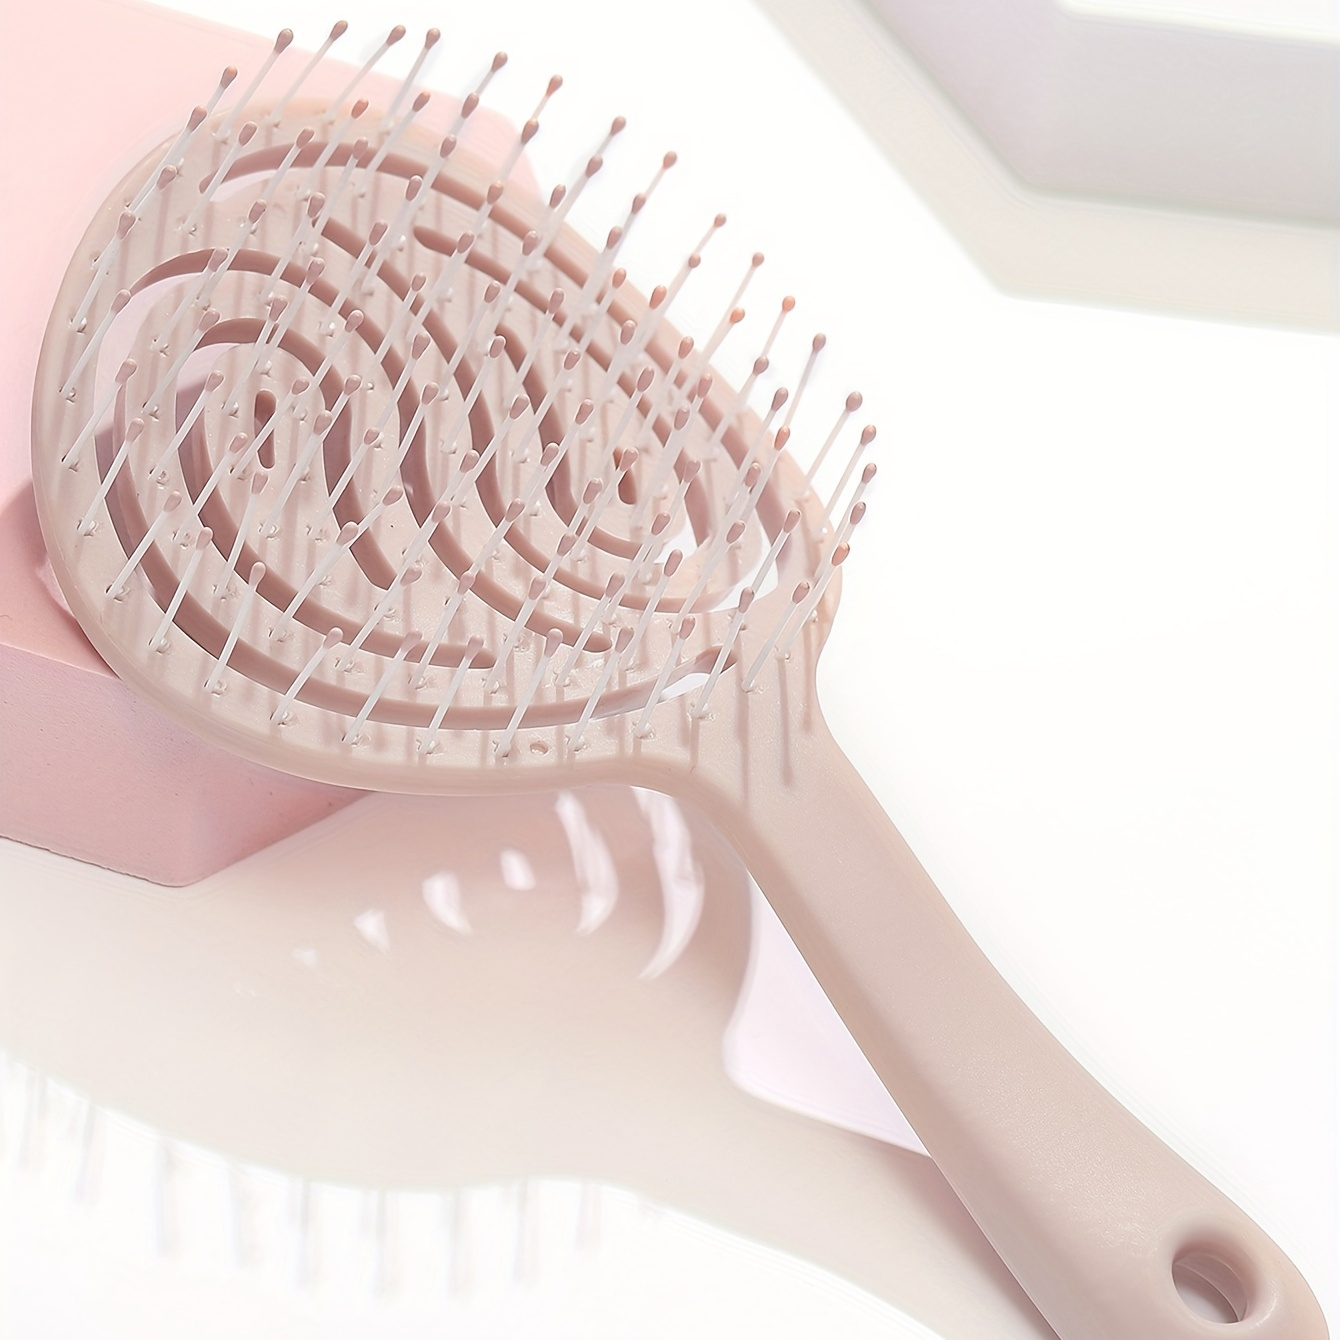 

Round Hollow Out Hair Comb Massage Hair Brush Anti Static Hair Brush For Wet Or Dry Hair